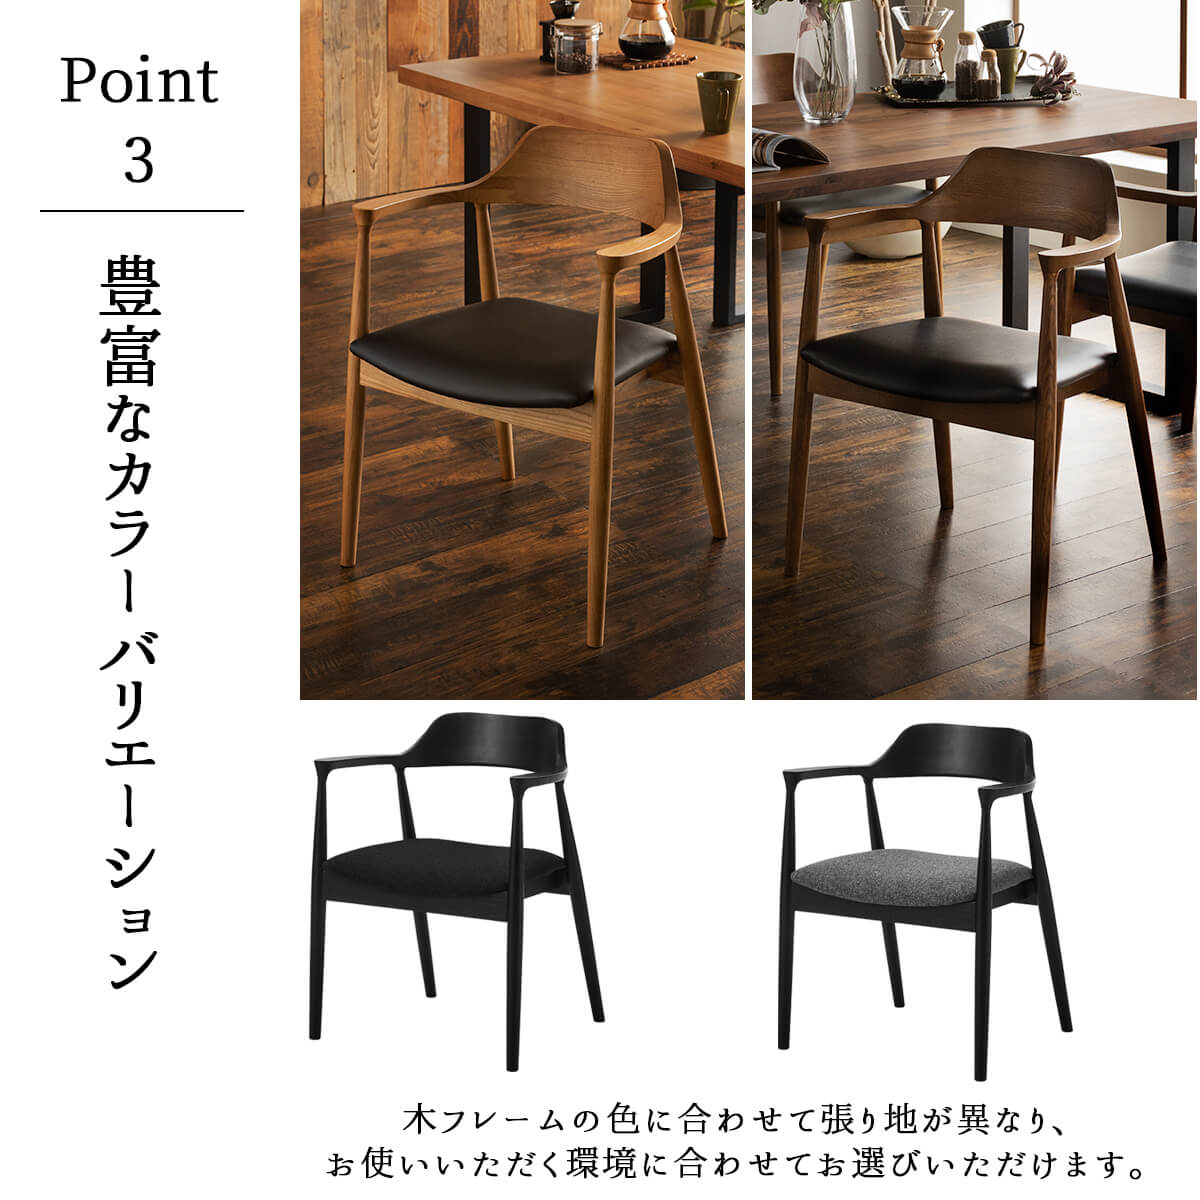  chair dining chair chair -. furniture Roger single goods roger natural tree dining purity oak walnut recommendation chair chair stylish wooden 